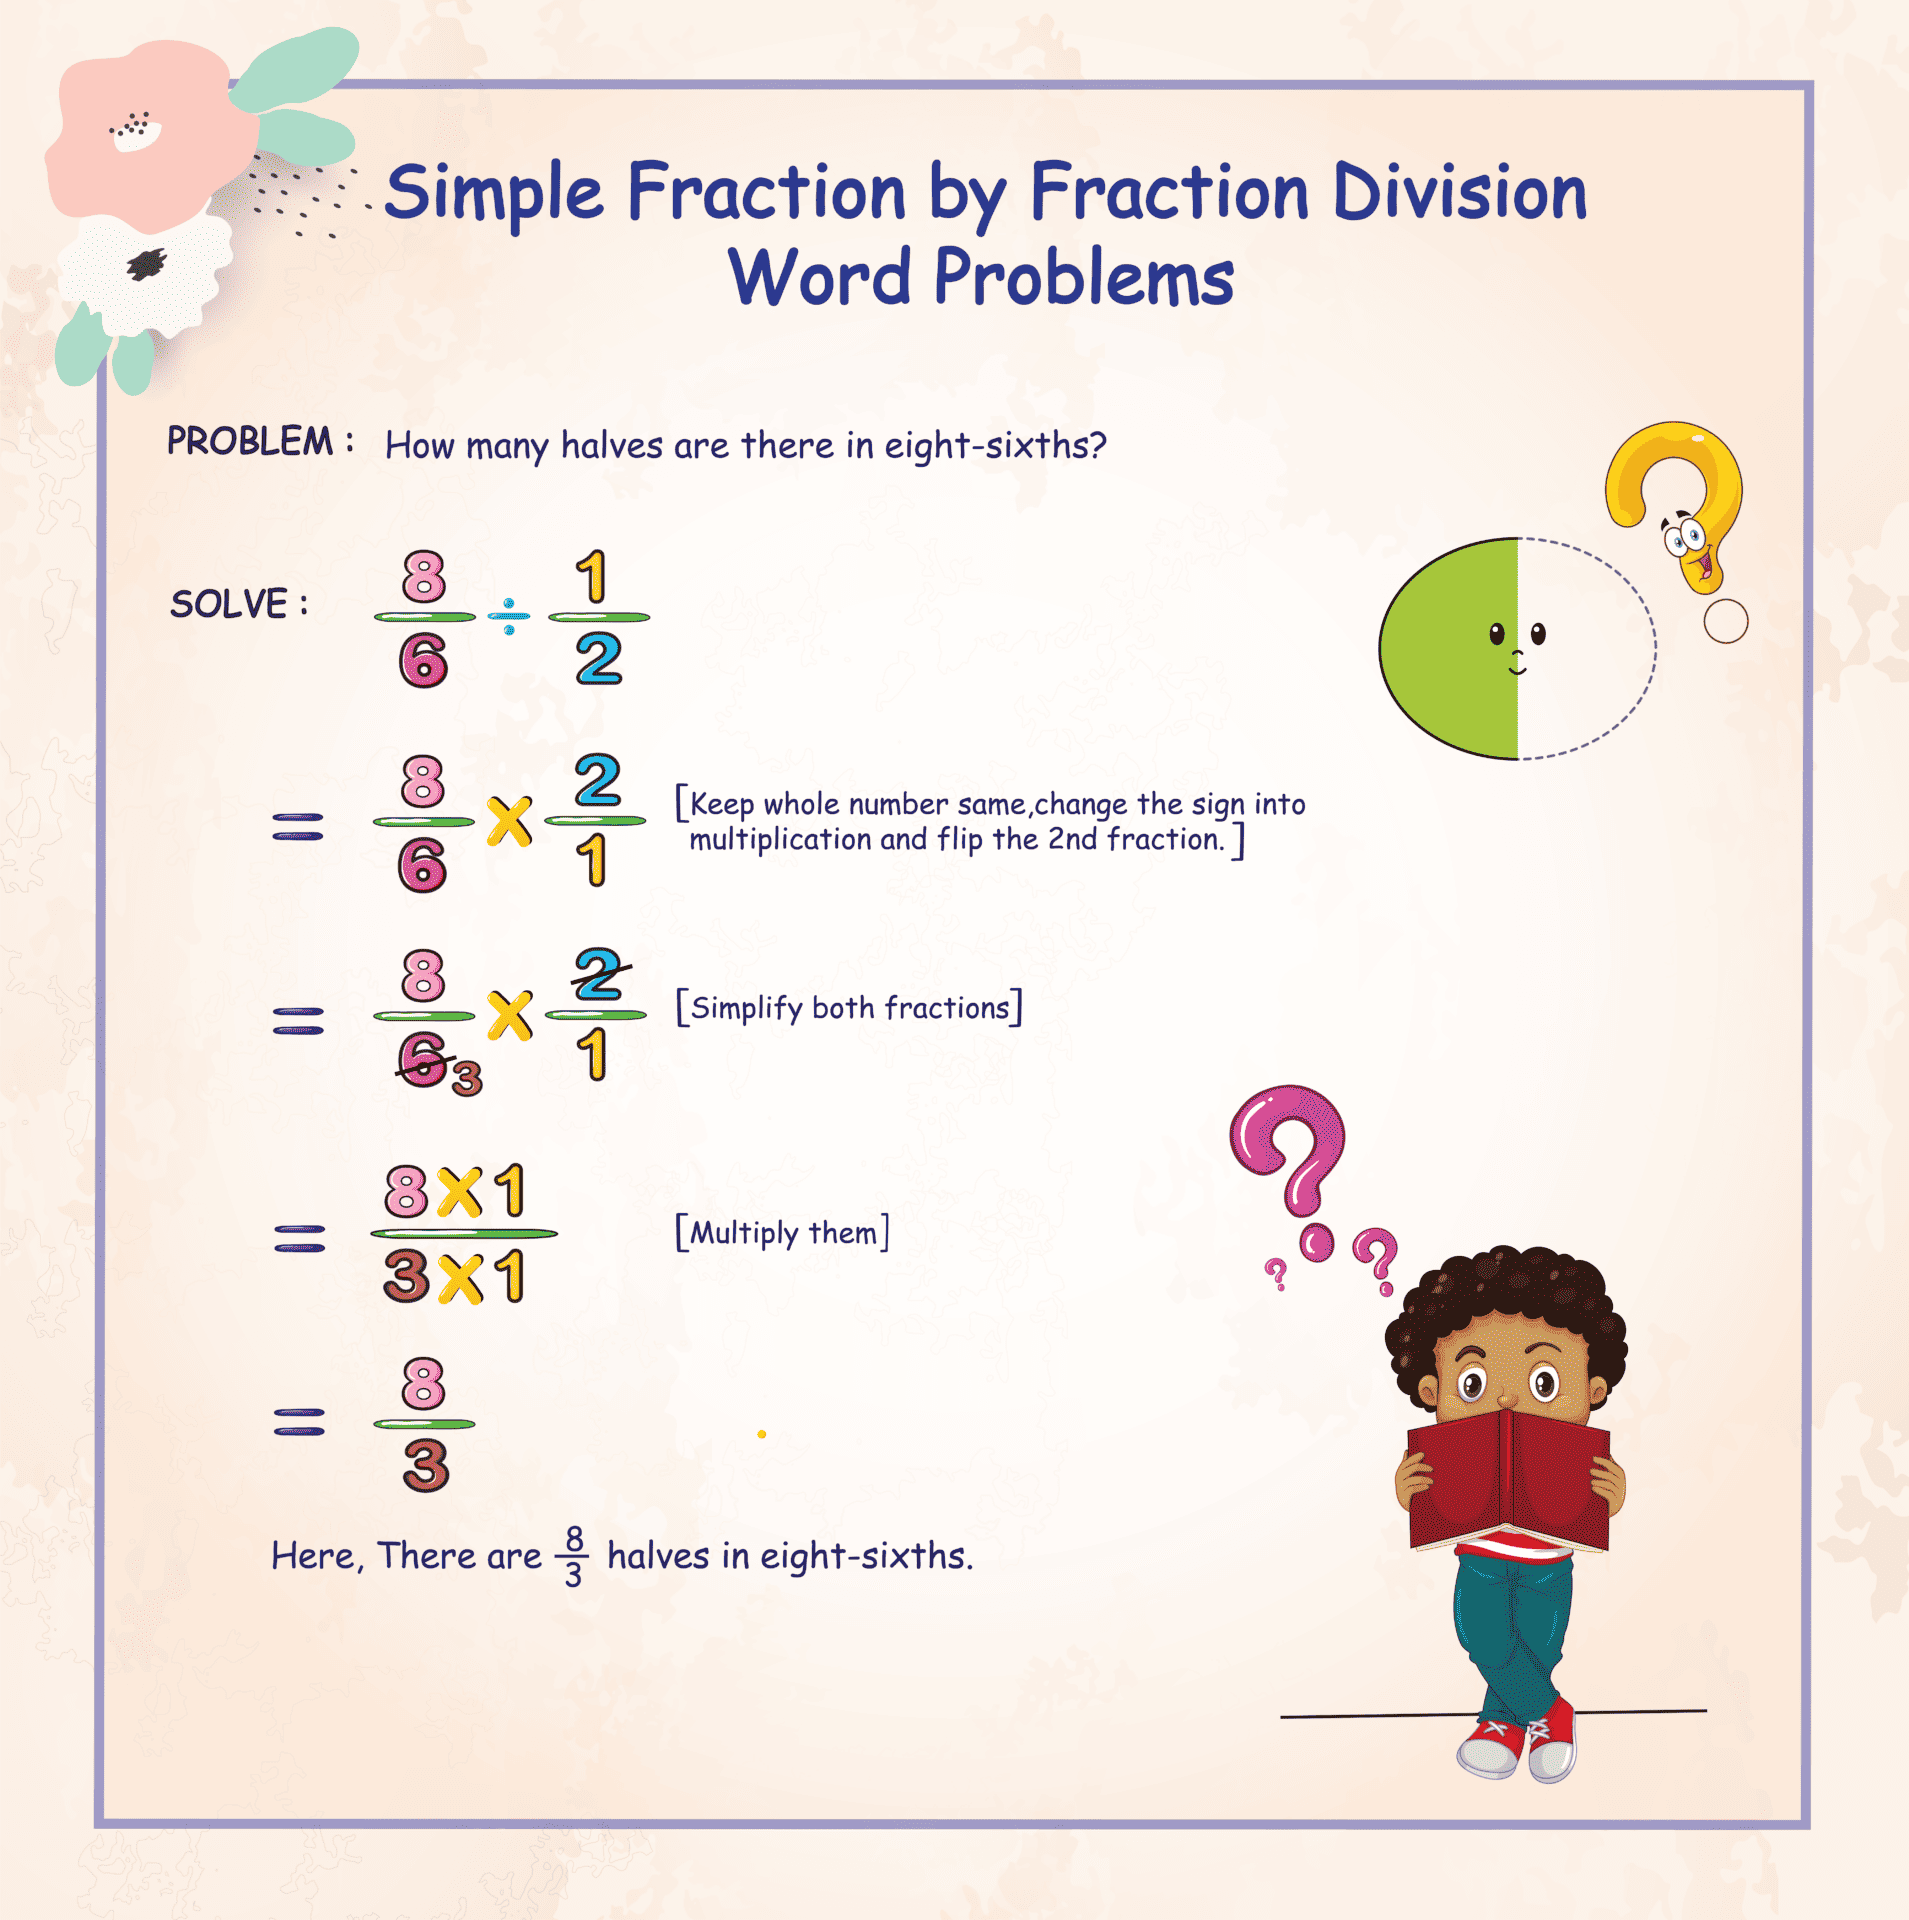 Simple fraction by fraction division word problems